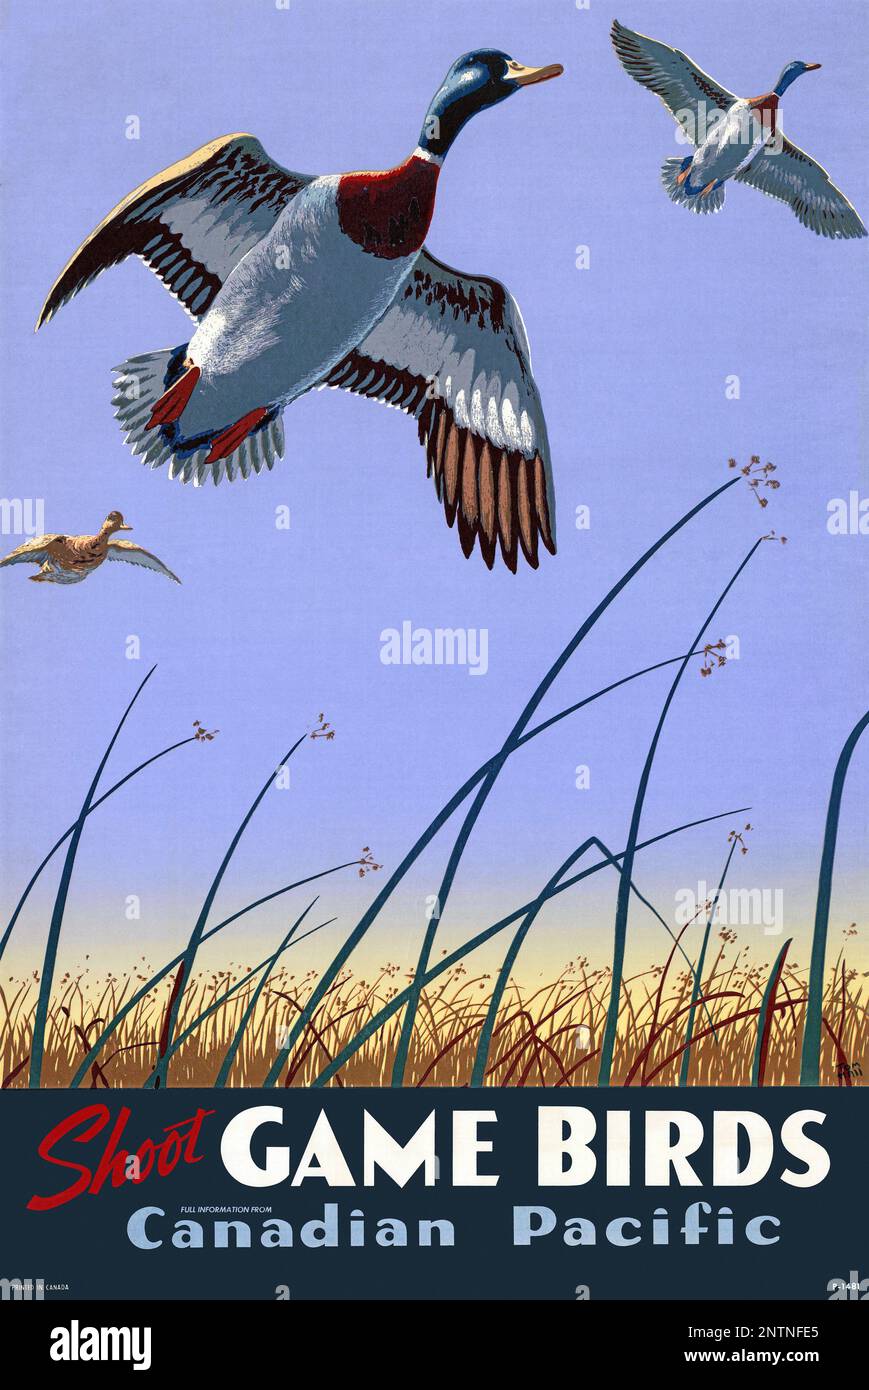 Shoot Game Birds. Canadian Pacific by Tom (Thomas) Hall (dates unknown). Poster published in 1938 in Canada. Stock Photo